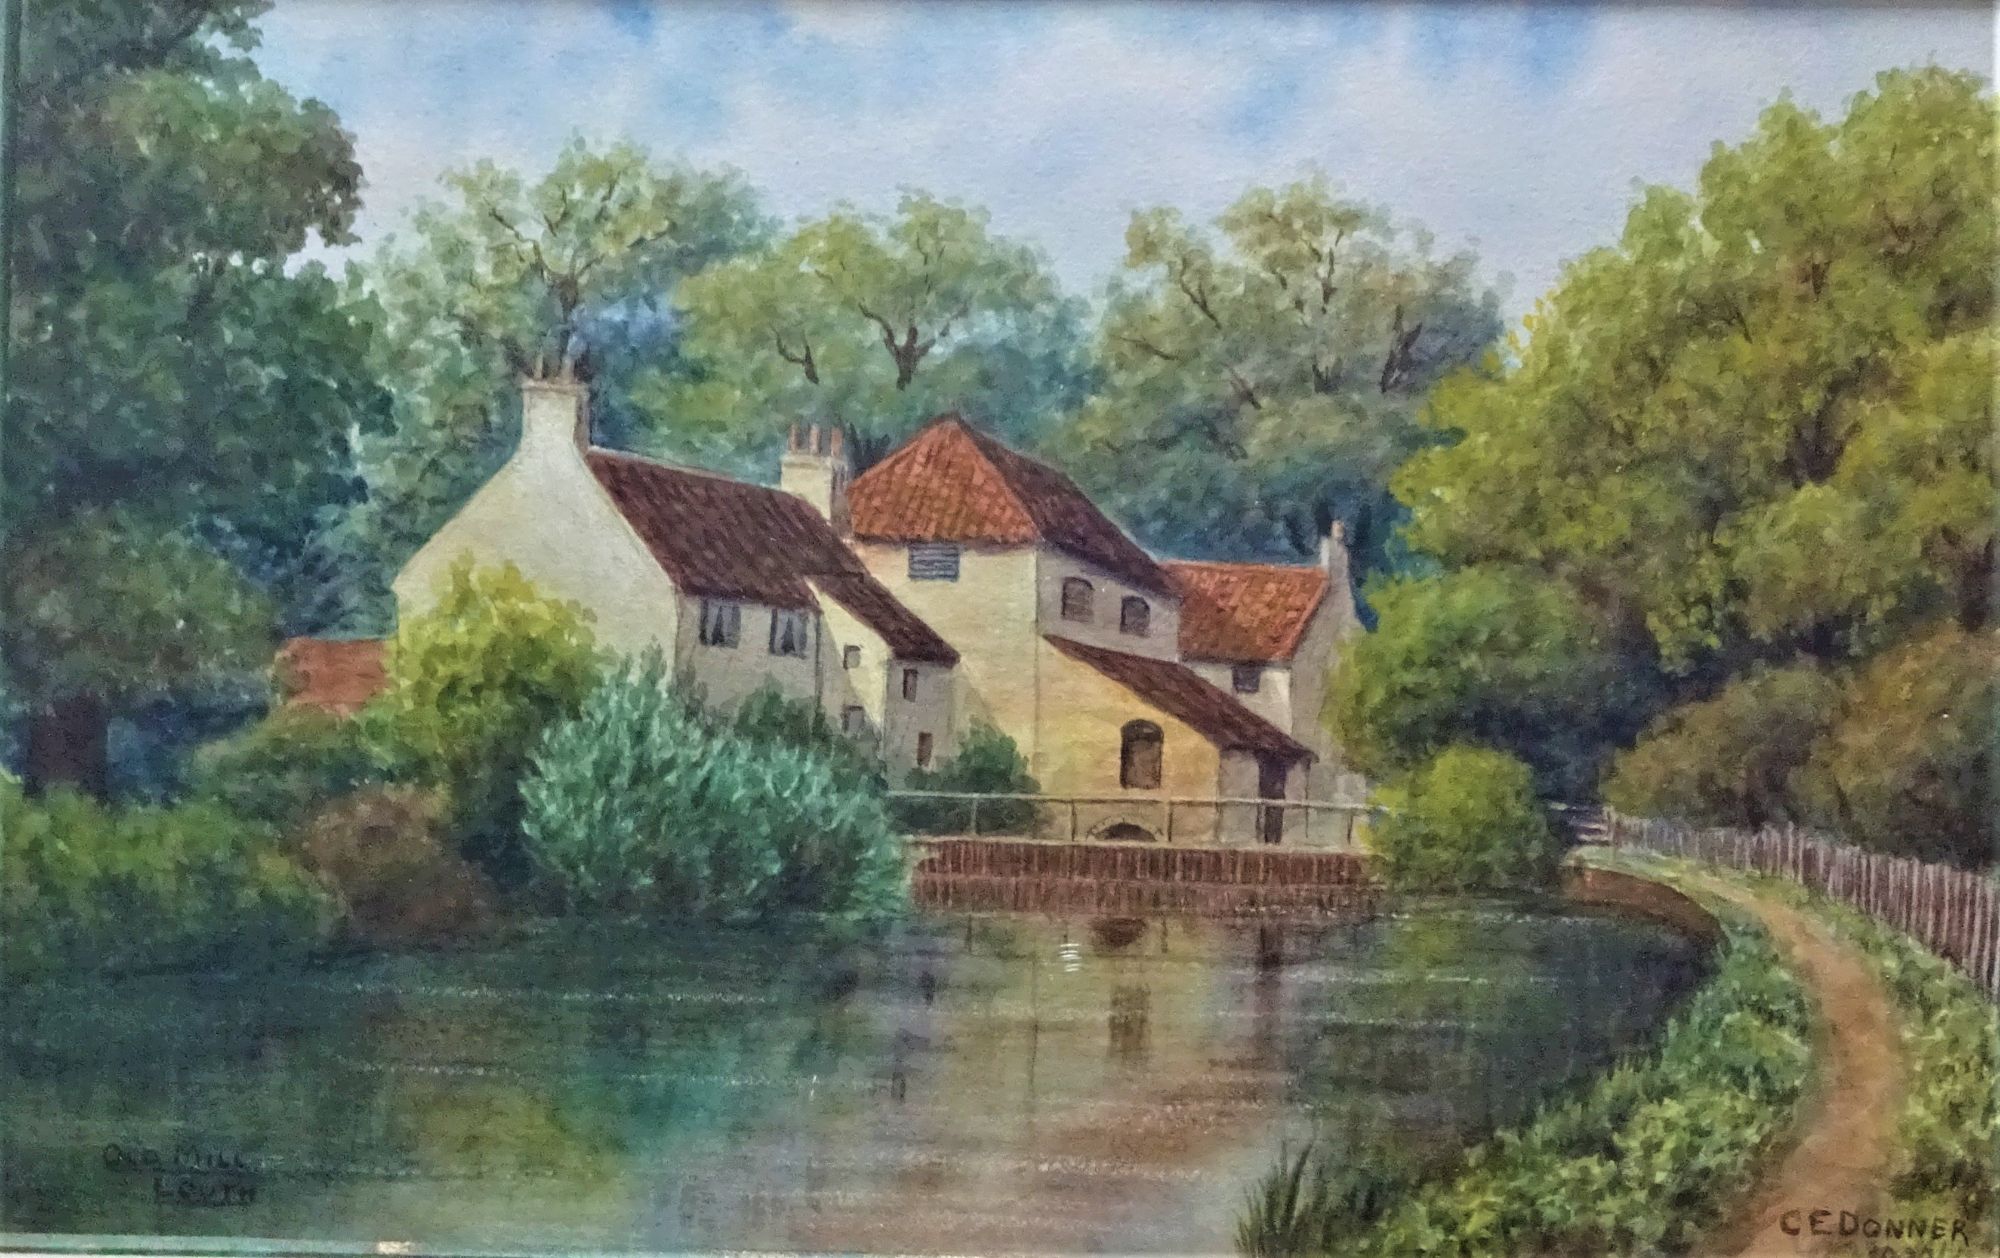 CE Donner, The Old Mill, Louth, watercolour, 1922.